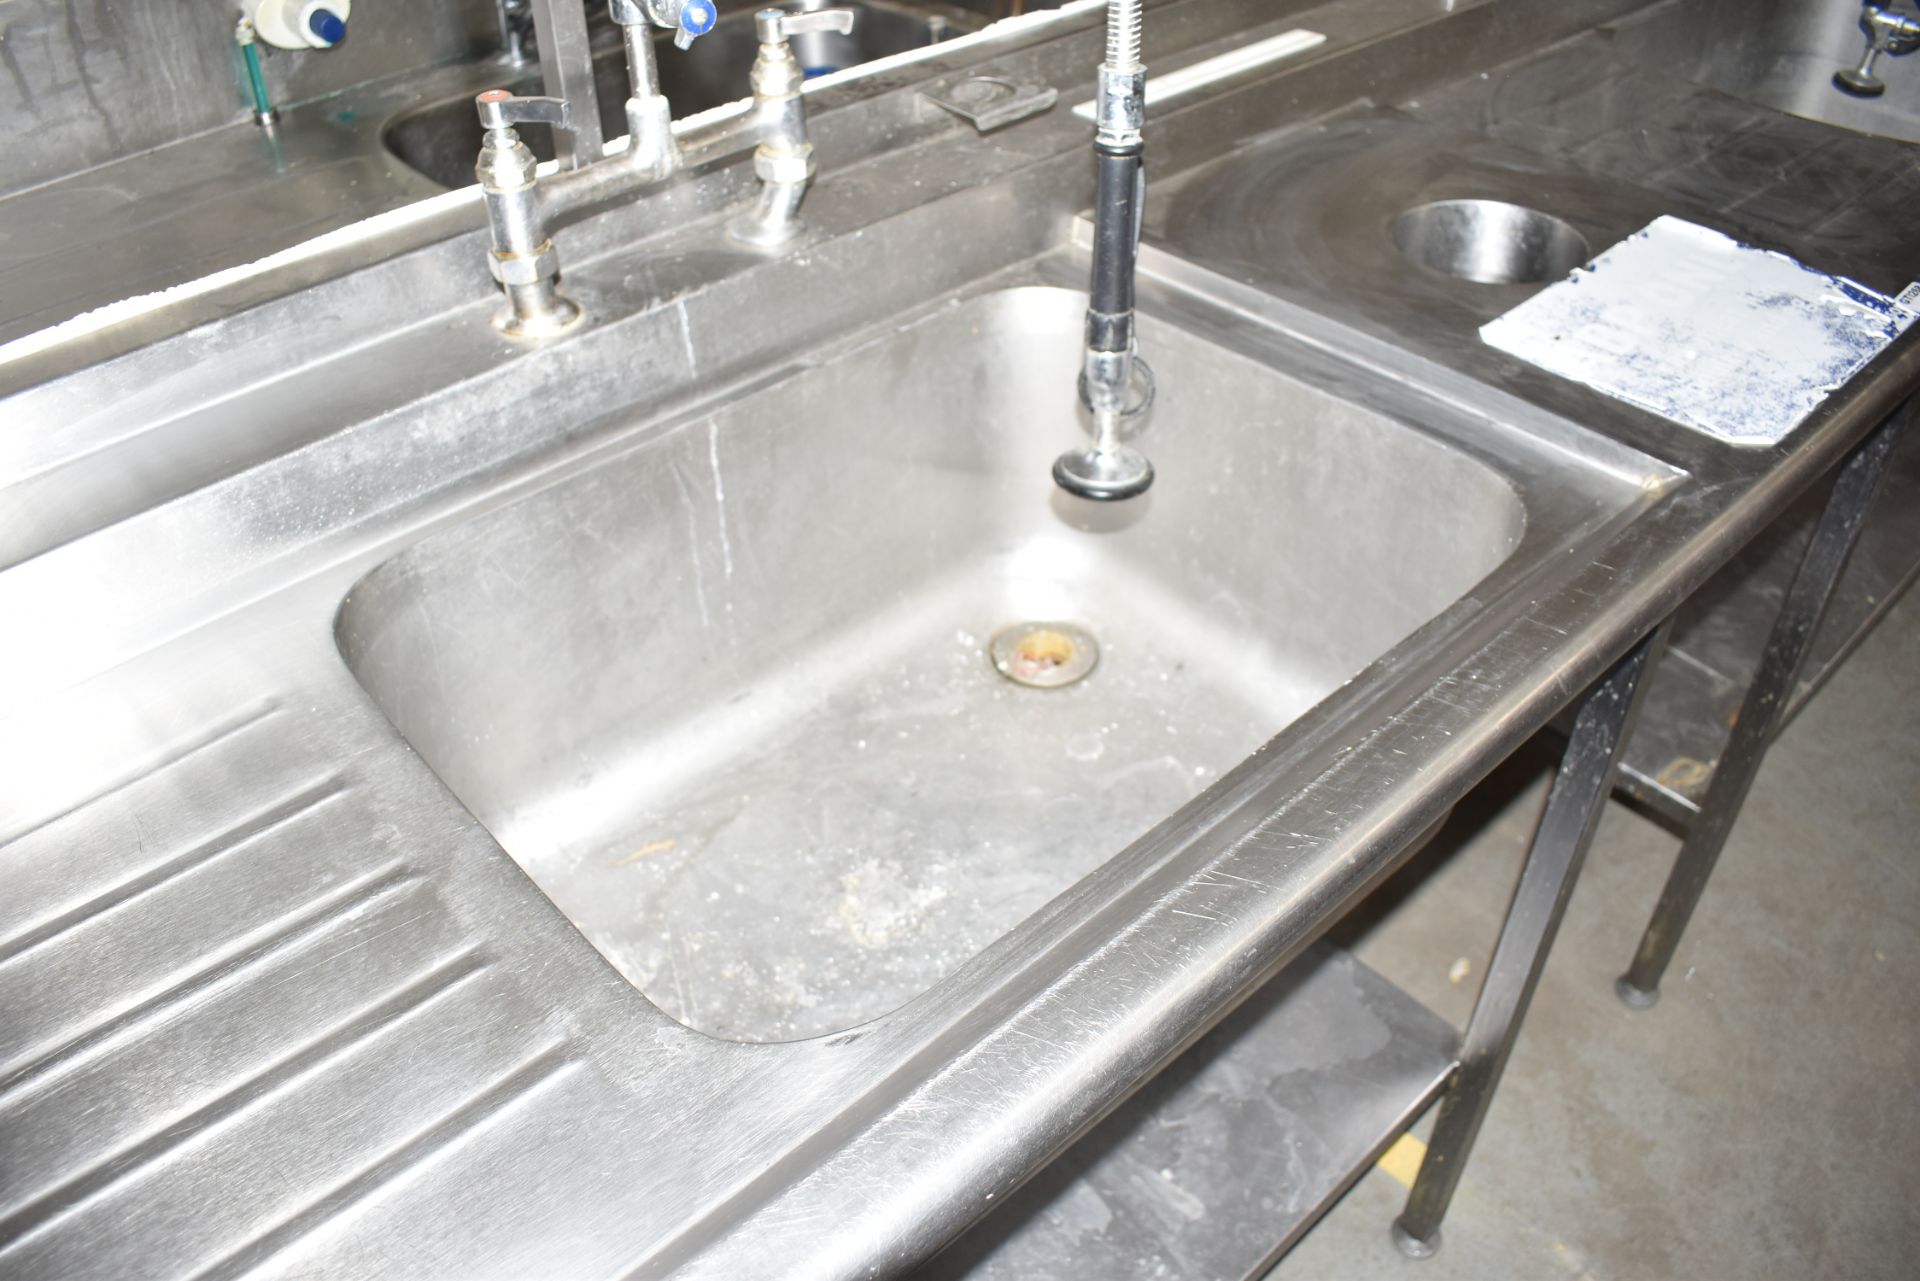 1 x Stainless Steel Commercial Wash Basin Unit With Twin Sink Bowl and Drainers, Mixer Taps, Spray - Image 5 of 12